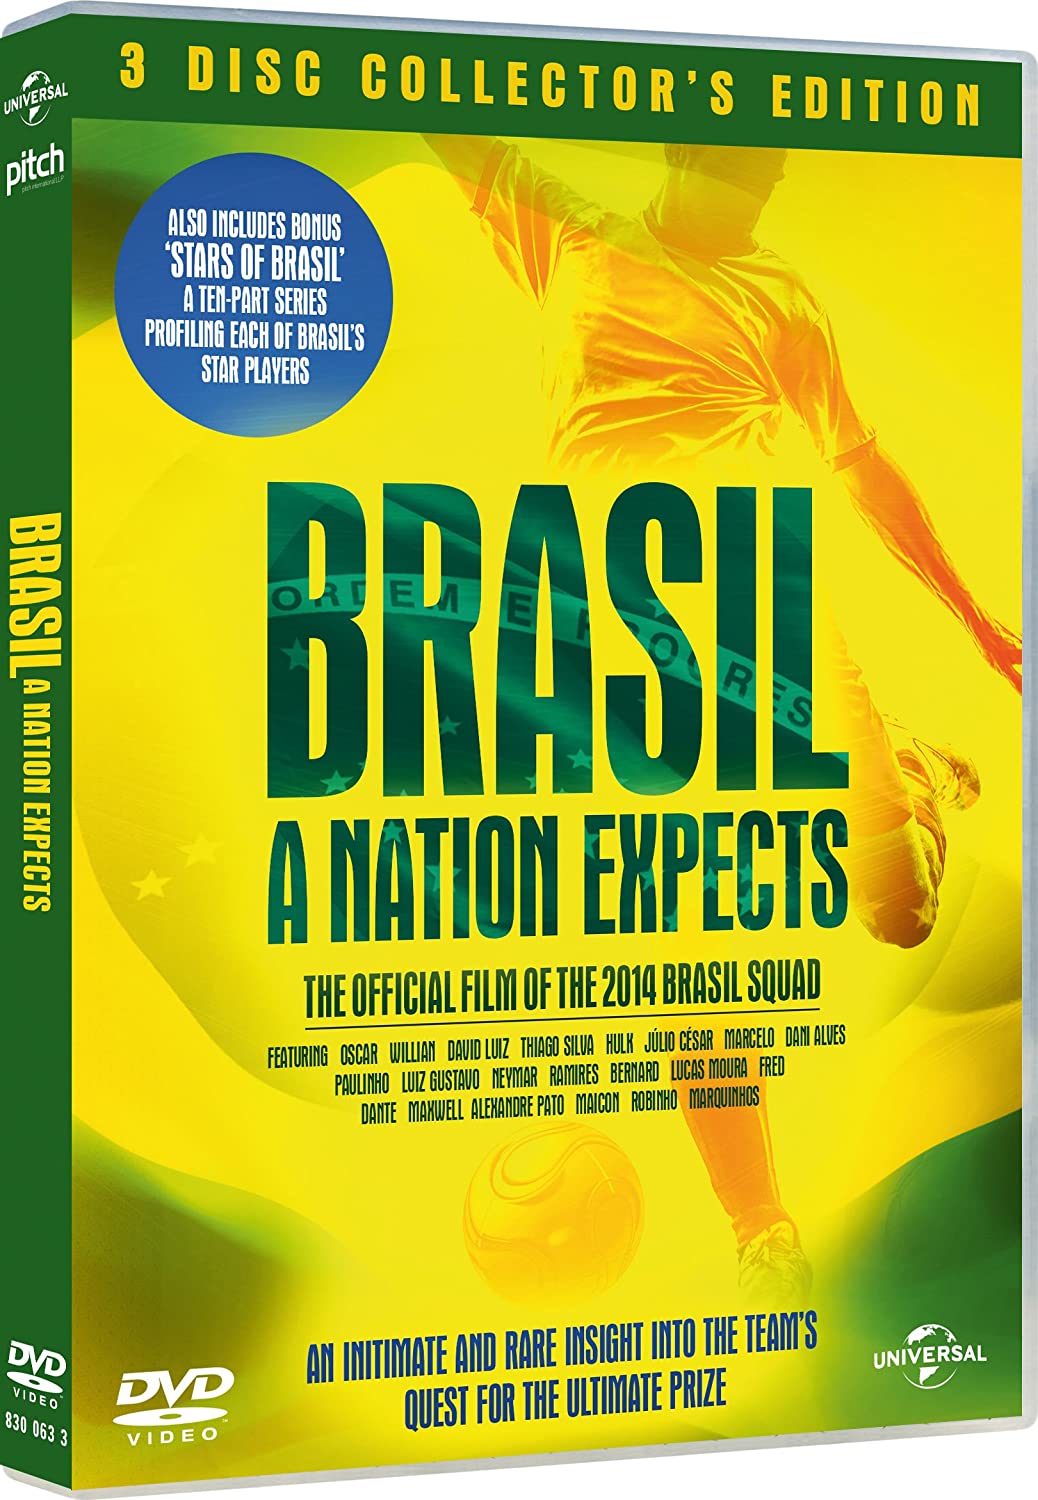 Brasil: A Nation Expects (Includes Stars of Brasil documentary series) - [DVD]